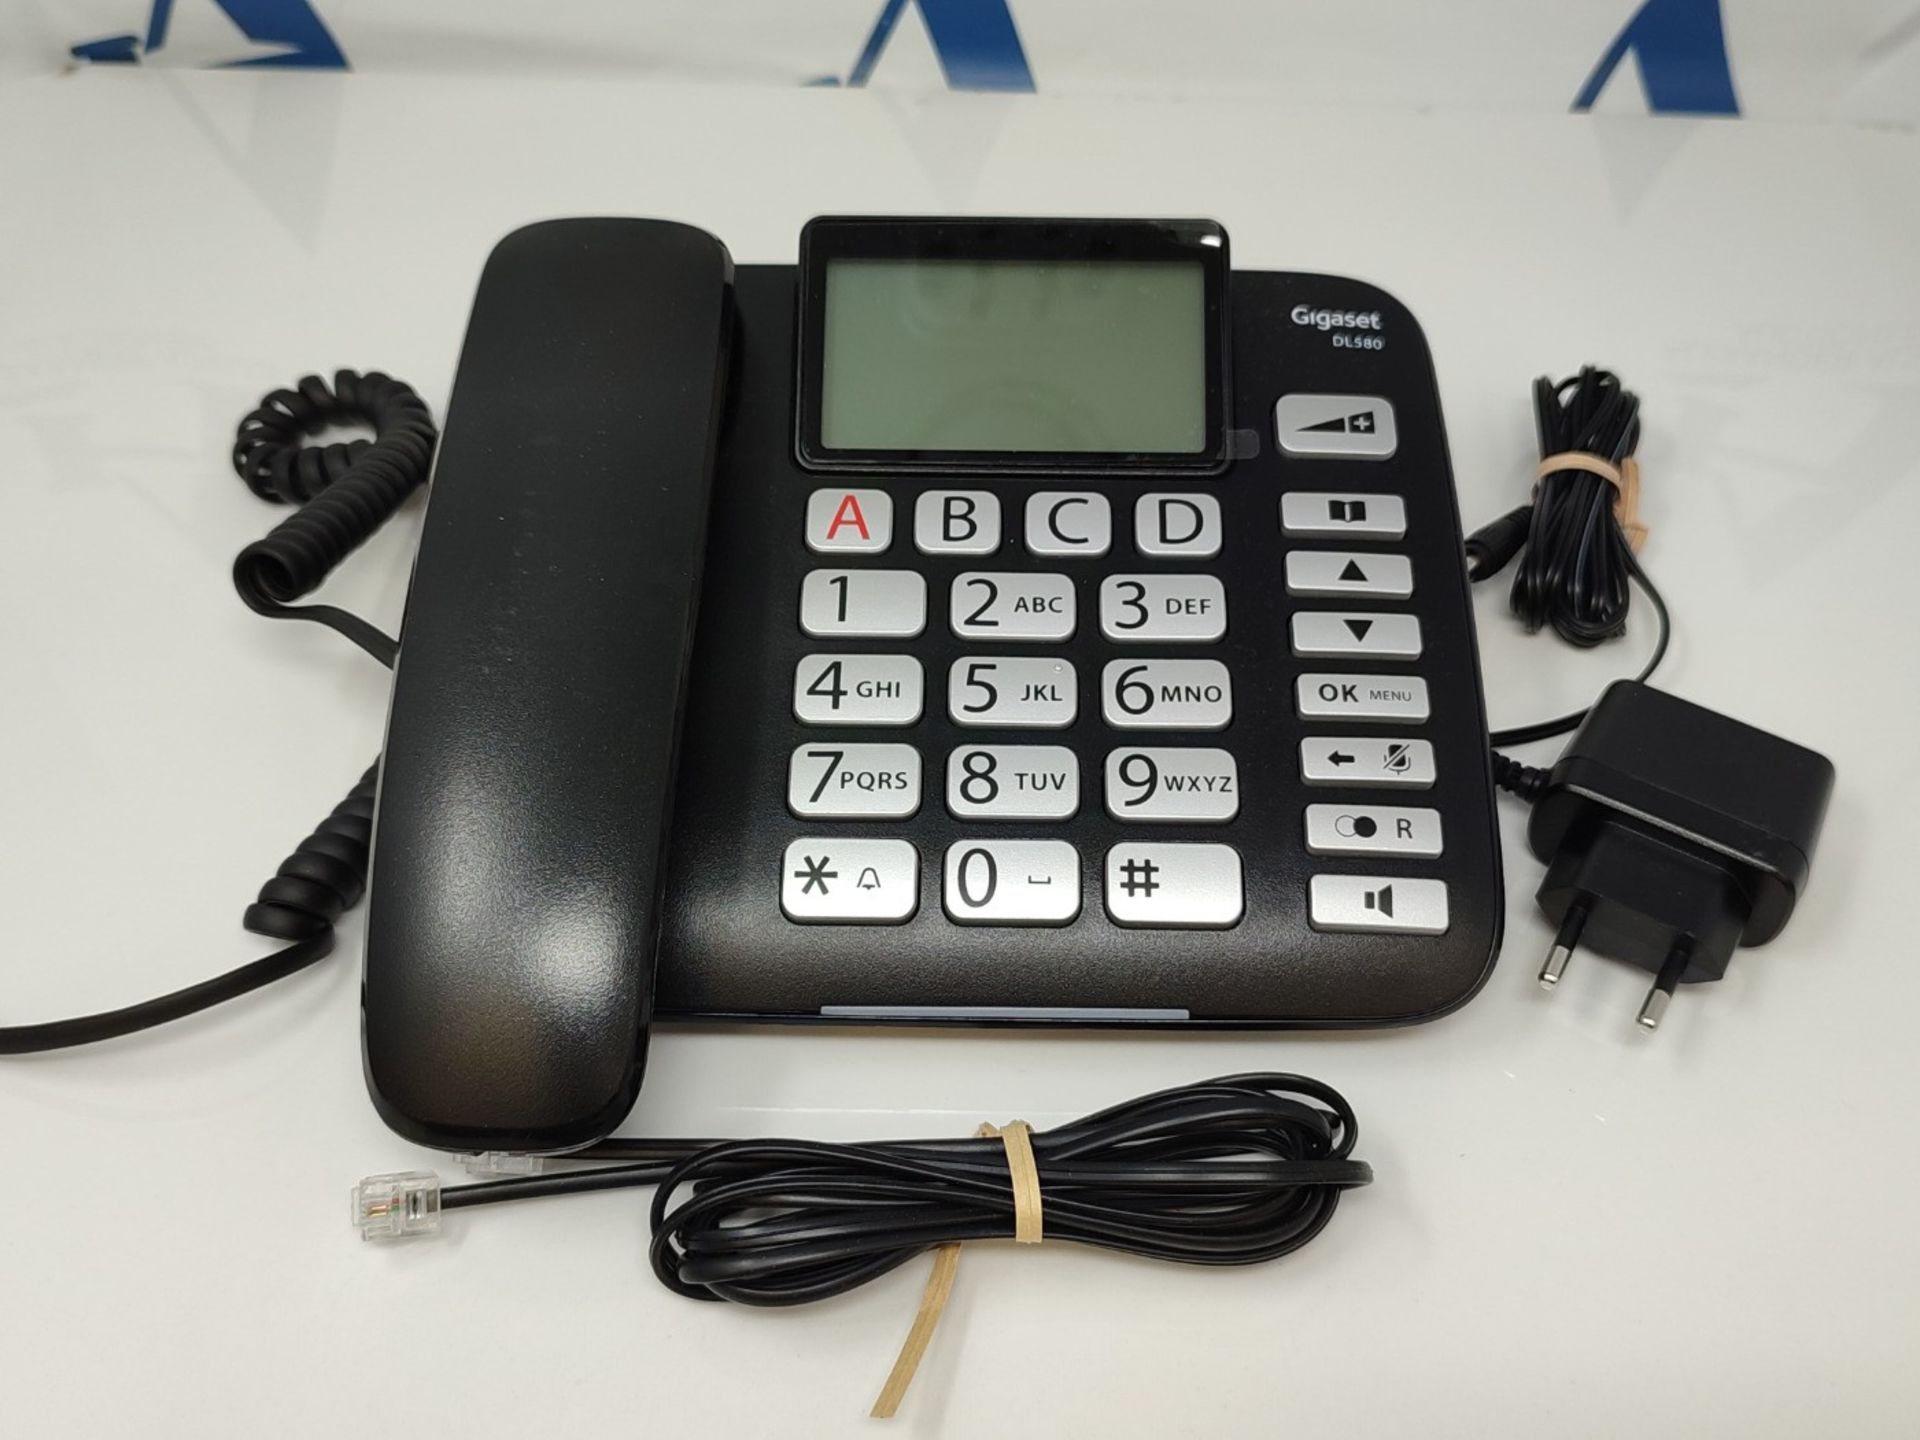 Gigaset DL580 Corded Telephone Black [French Version] - Image 2 of 6